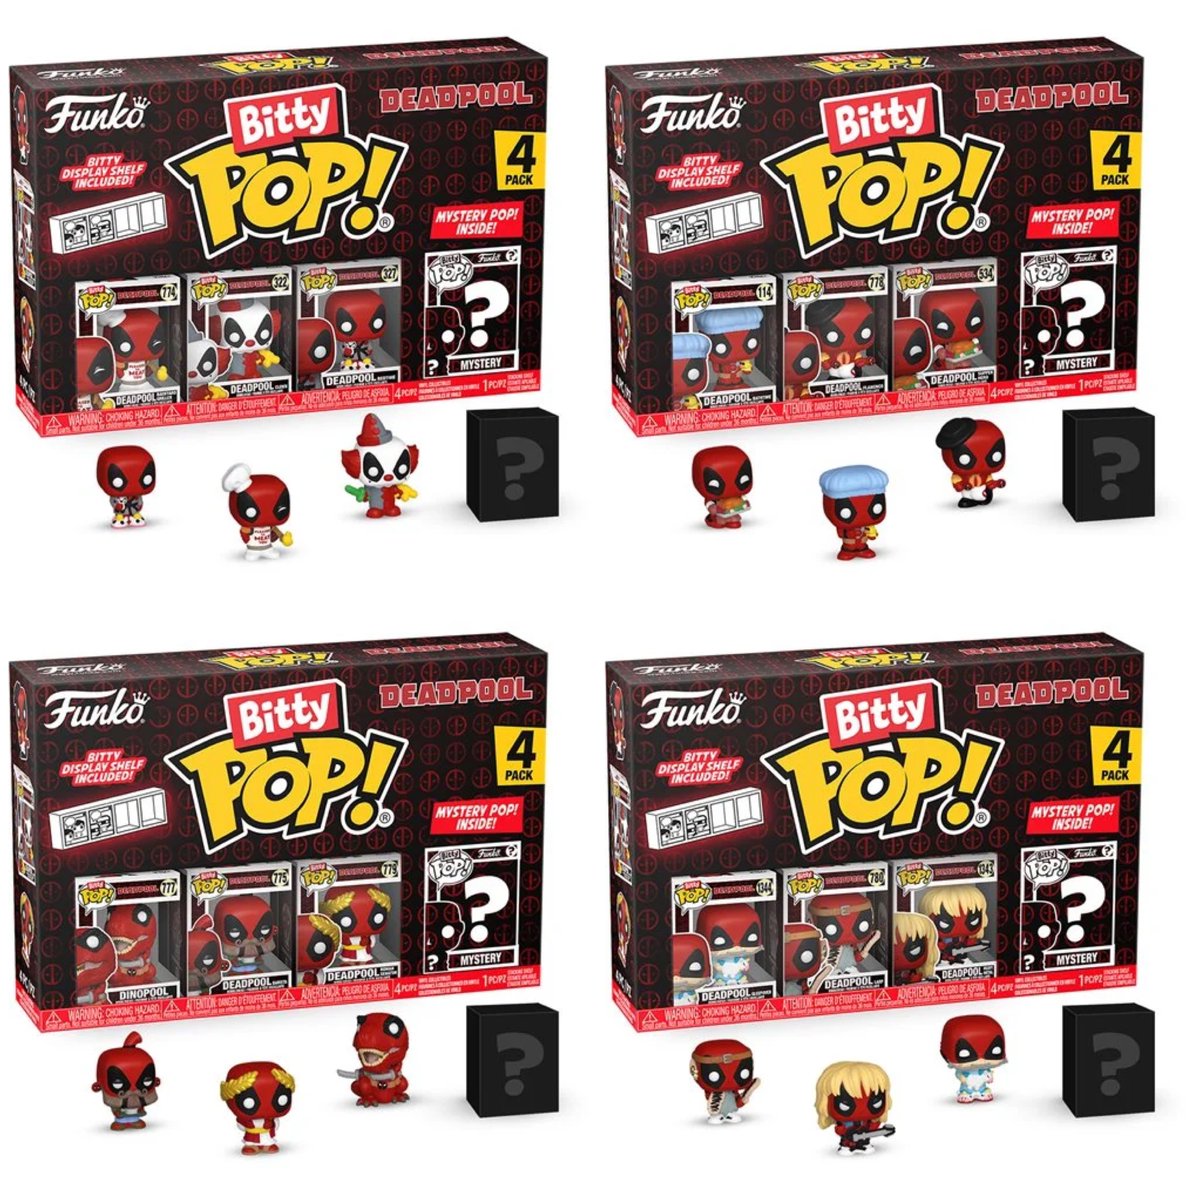 Deadpool Bitty Pops now available to preorder! #Funko #Deadpool #ad

Entertainment Earth ► ee.toys/I83FIU
Amazon ► amzn.to/4dEEfzQ

#Marvel #bittypop #funkopop #popvinyl